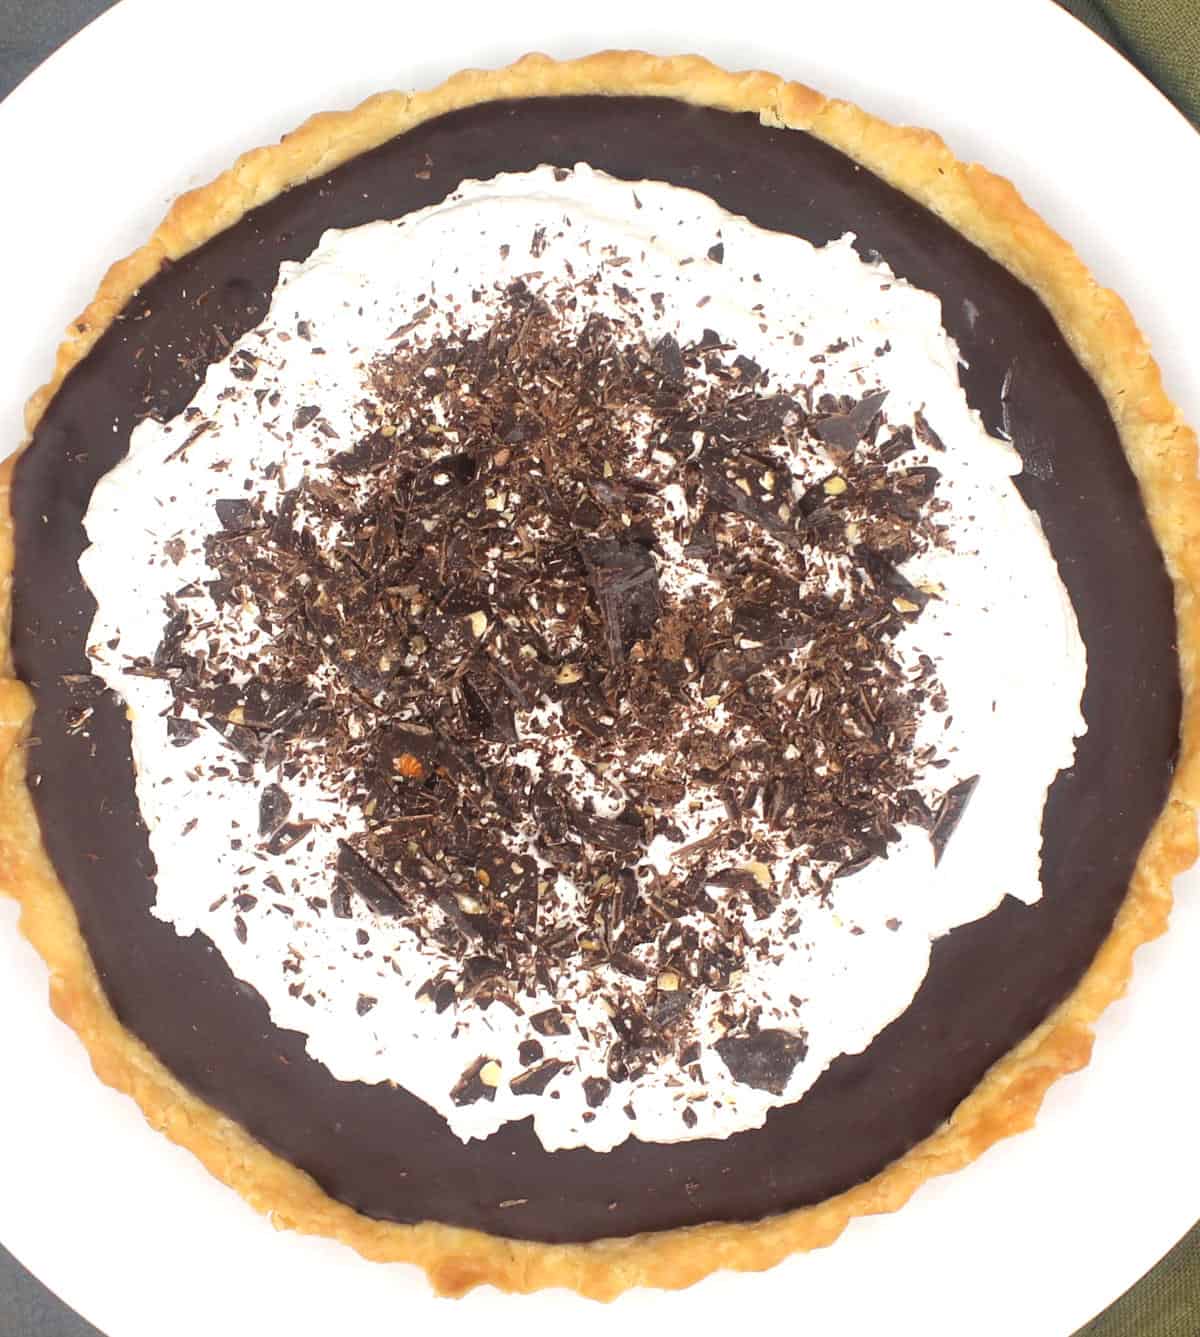 Vegan chocolate pie with mounds of whipped cream topping and shards of dark chocolate.